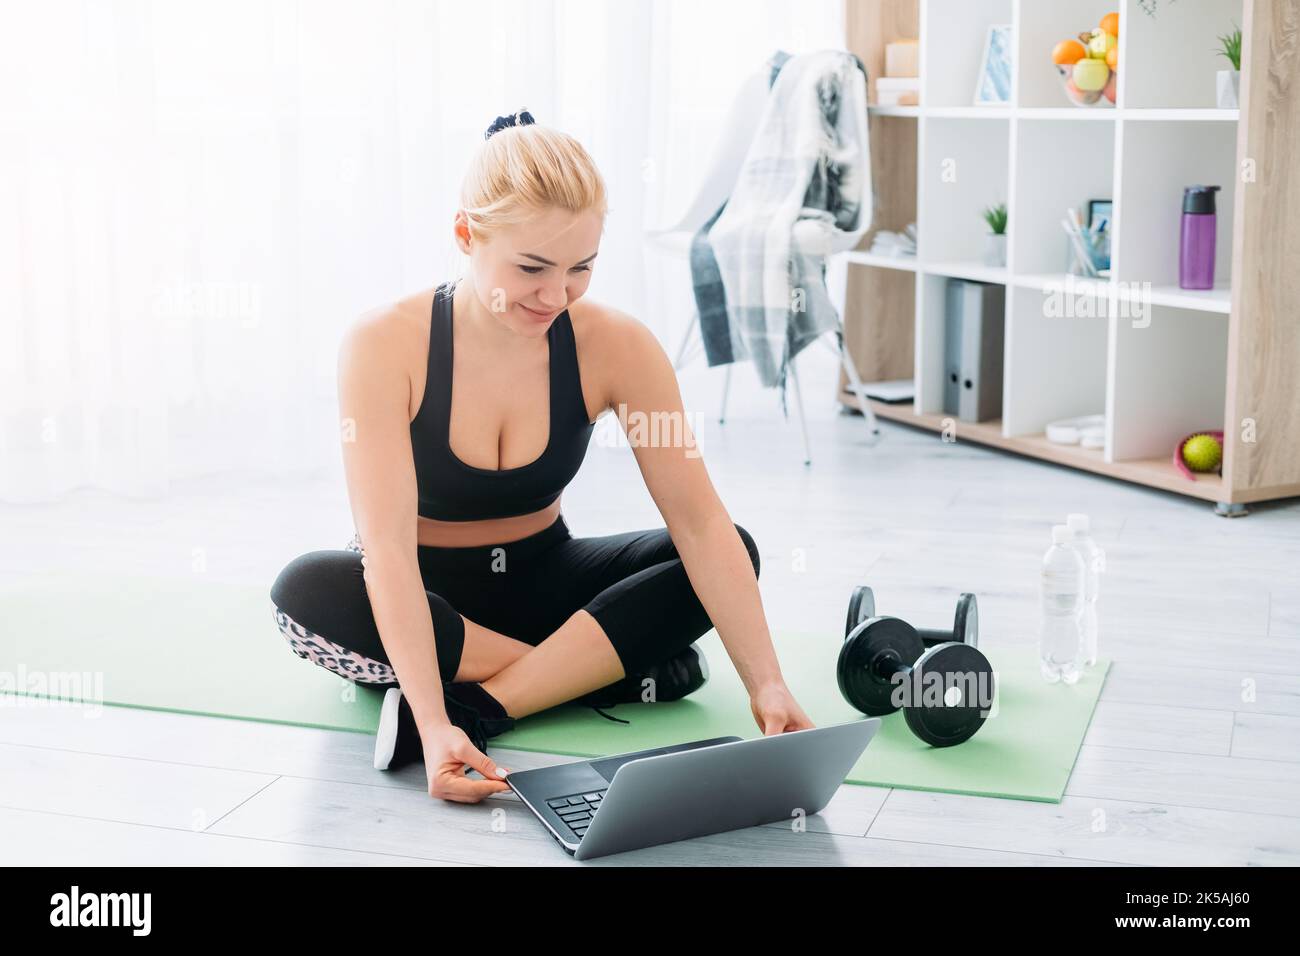 online sport athletic woman home gym healthy Stock Photo